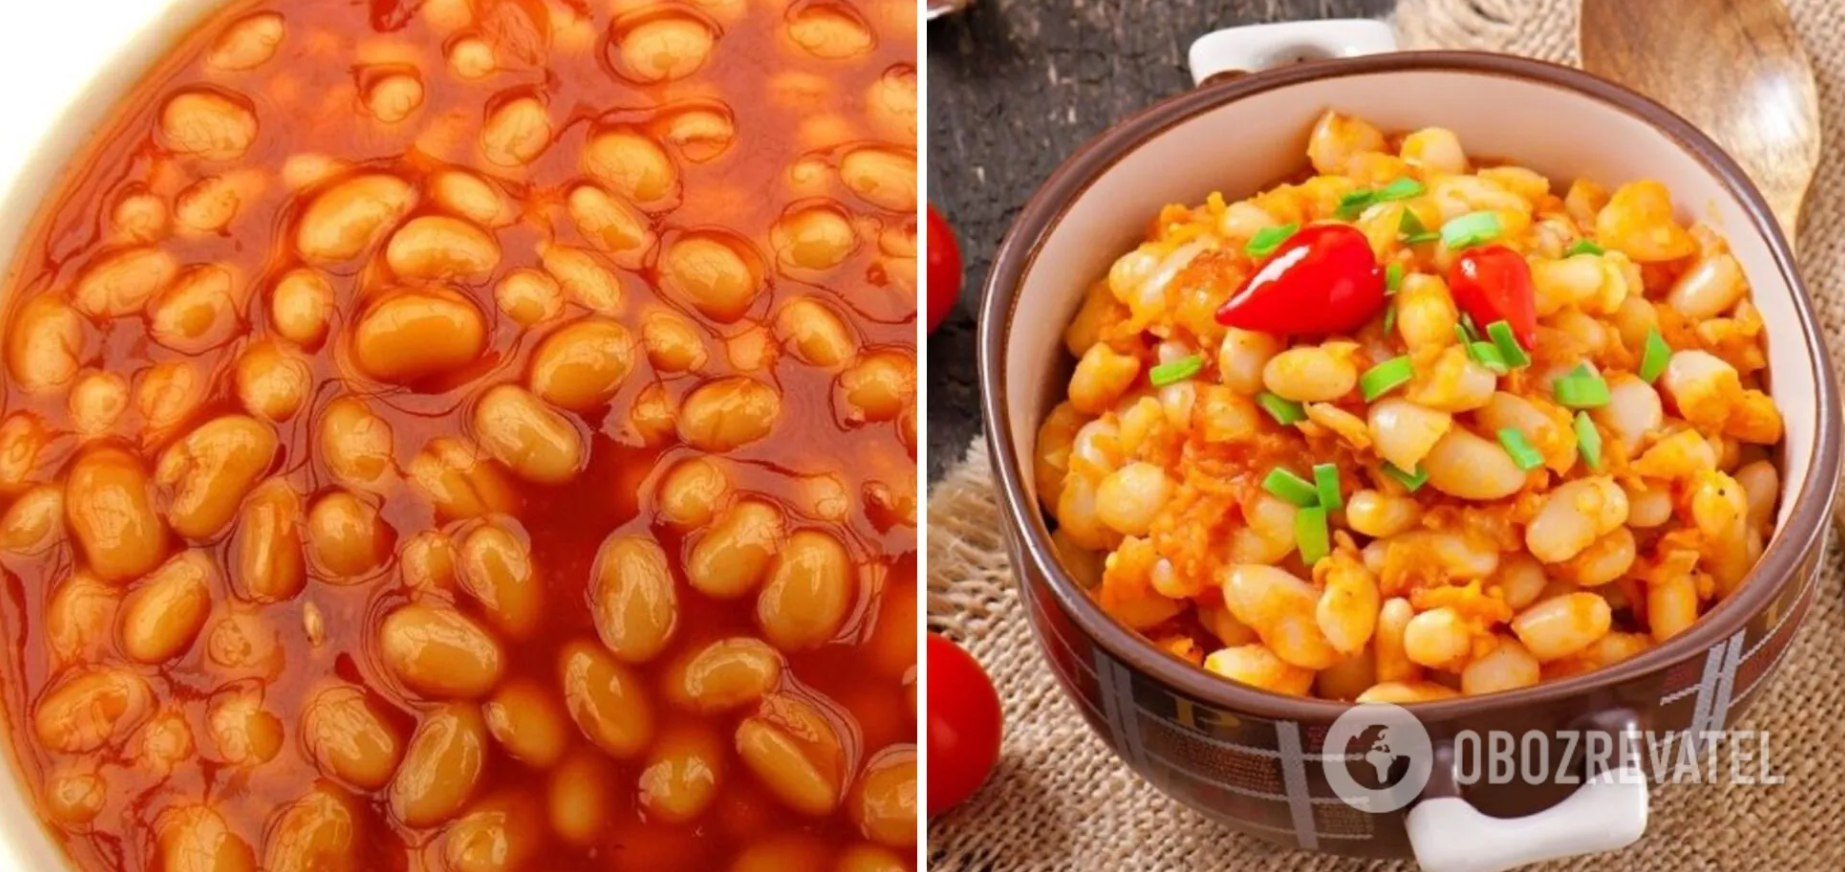 How to cook beans for winter